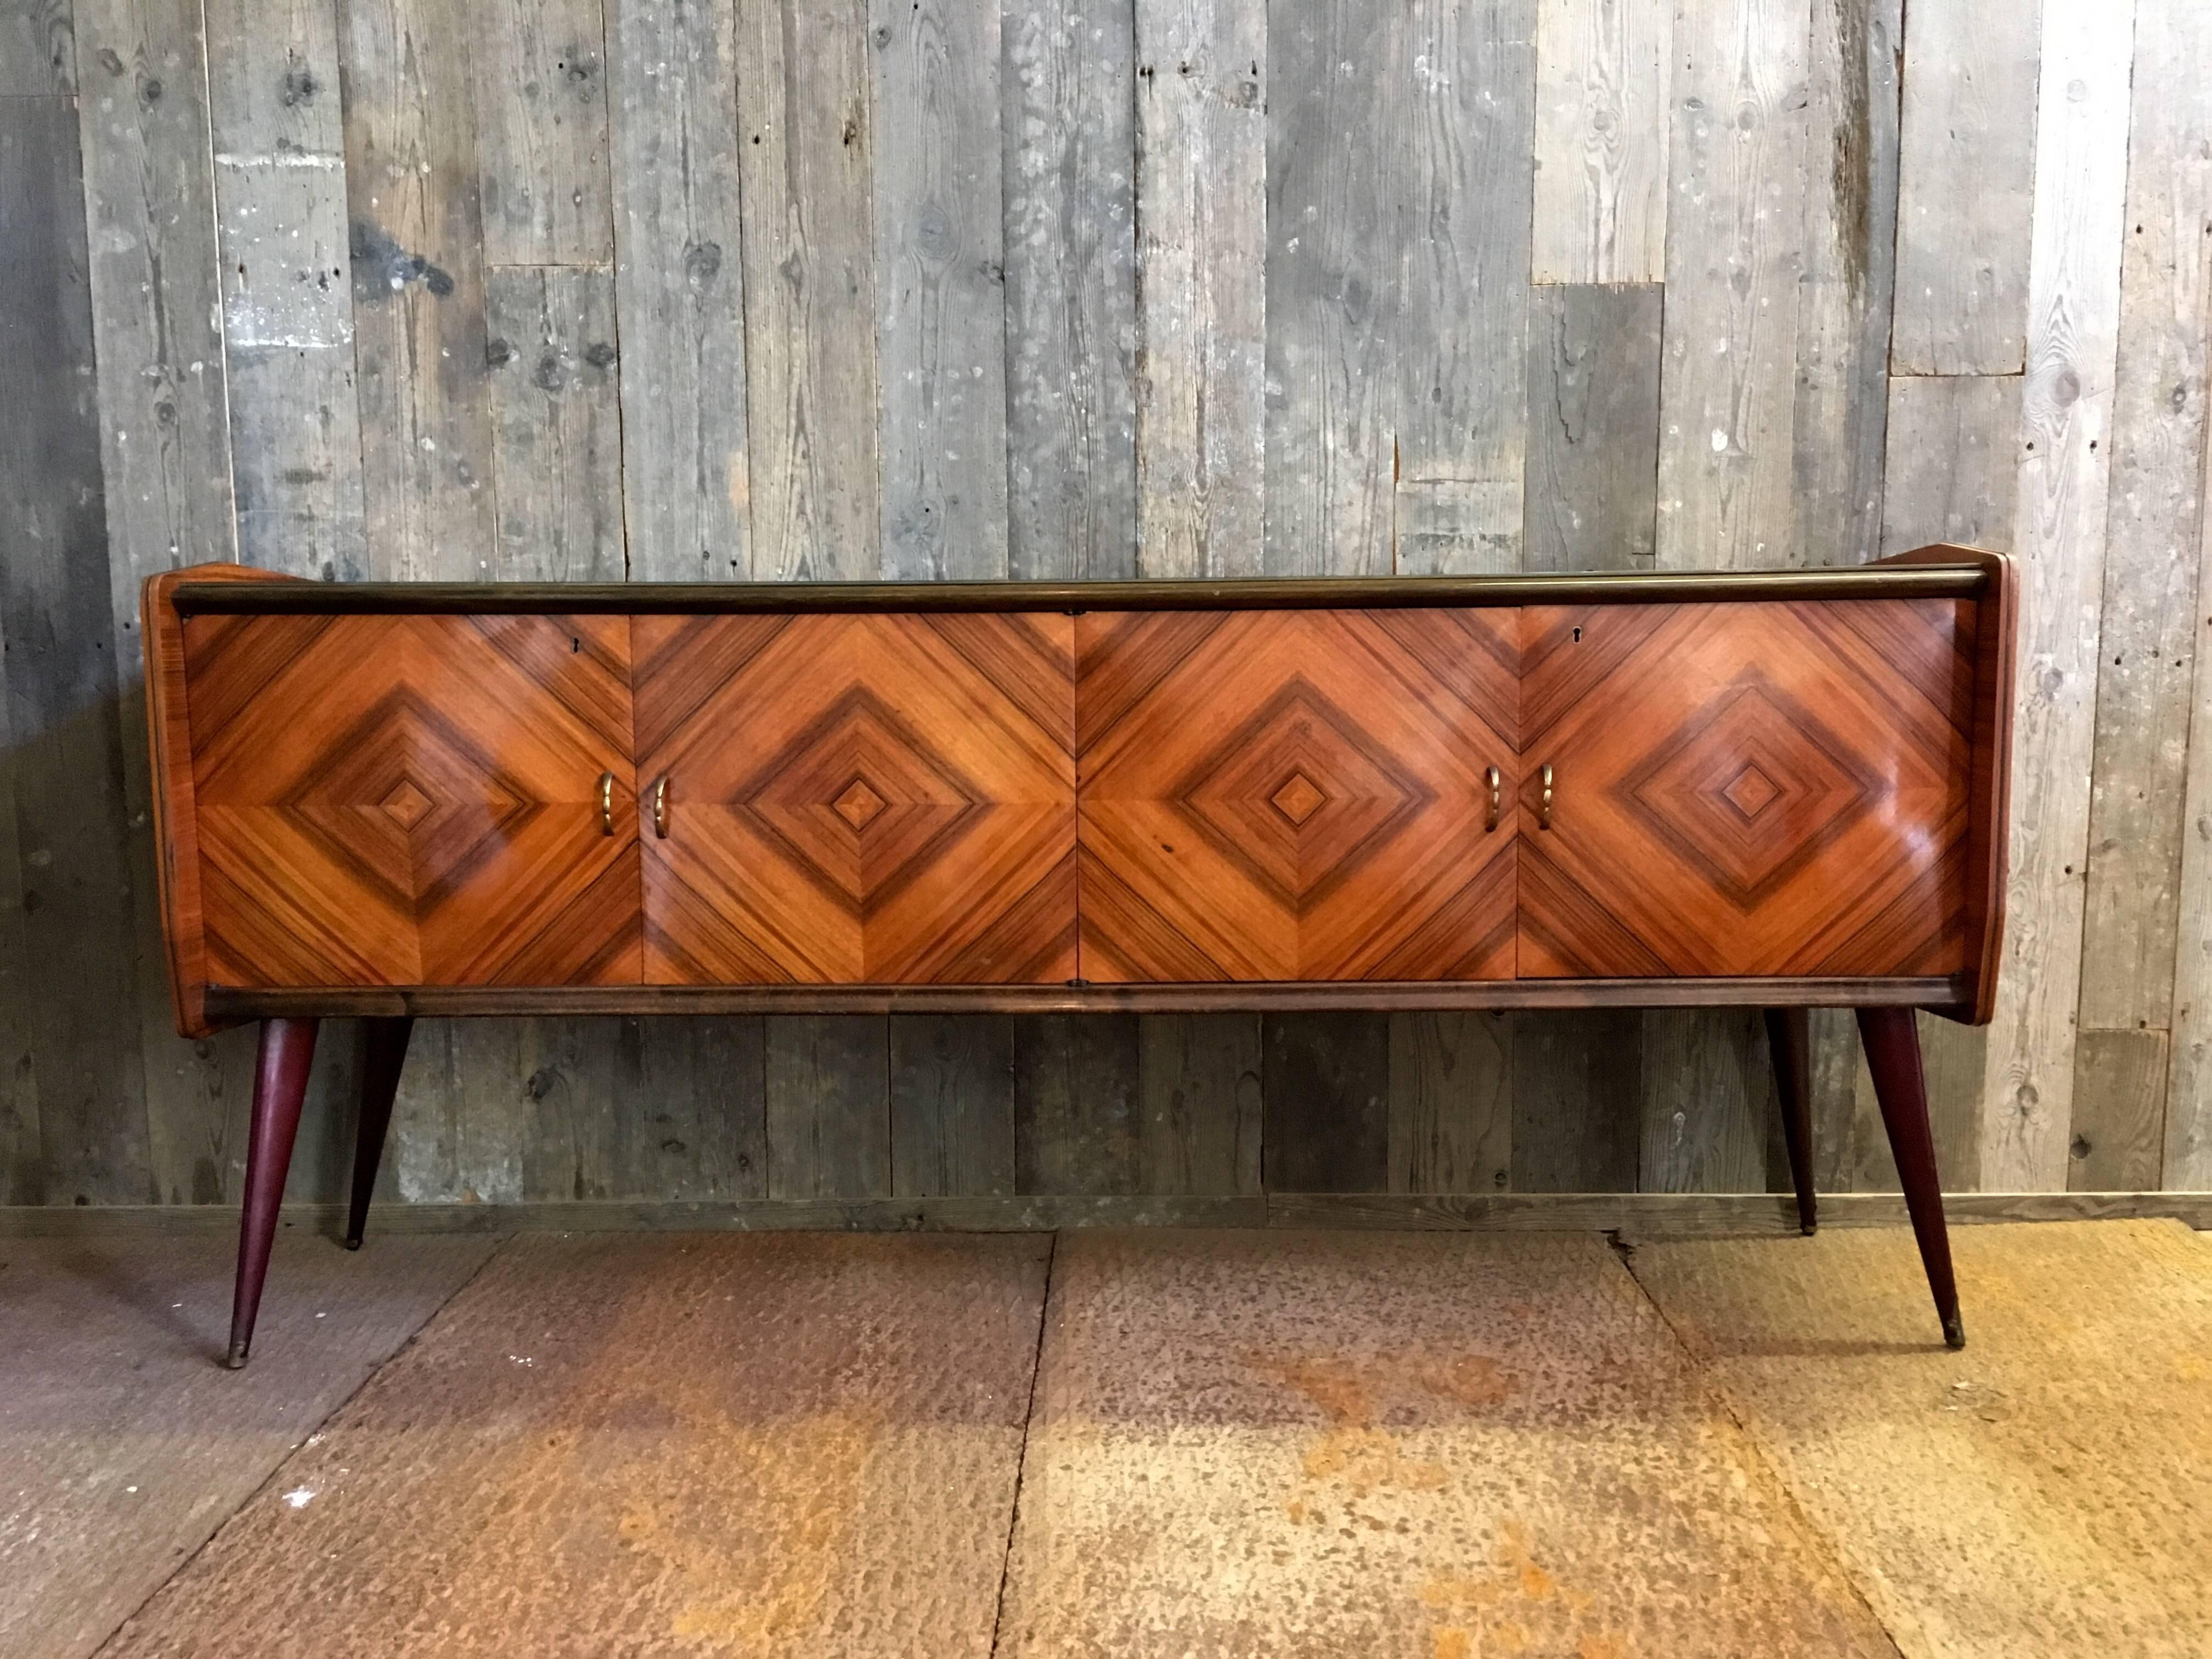 Rare rosewood veneered design sideboard by Vittorio Dassi (Milan, 1893-1973).

The rosewood veneer creates a beautiful rhombus pattern on the four doors. The handles are made of brass and a glass plate covers the top of the sideboard.